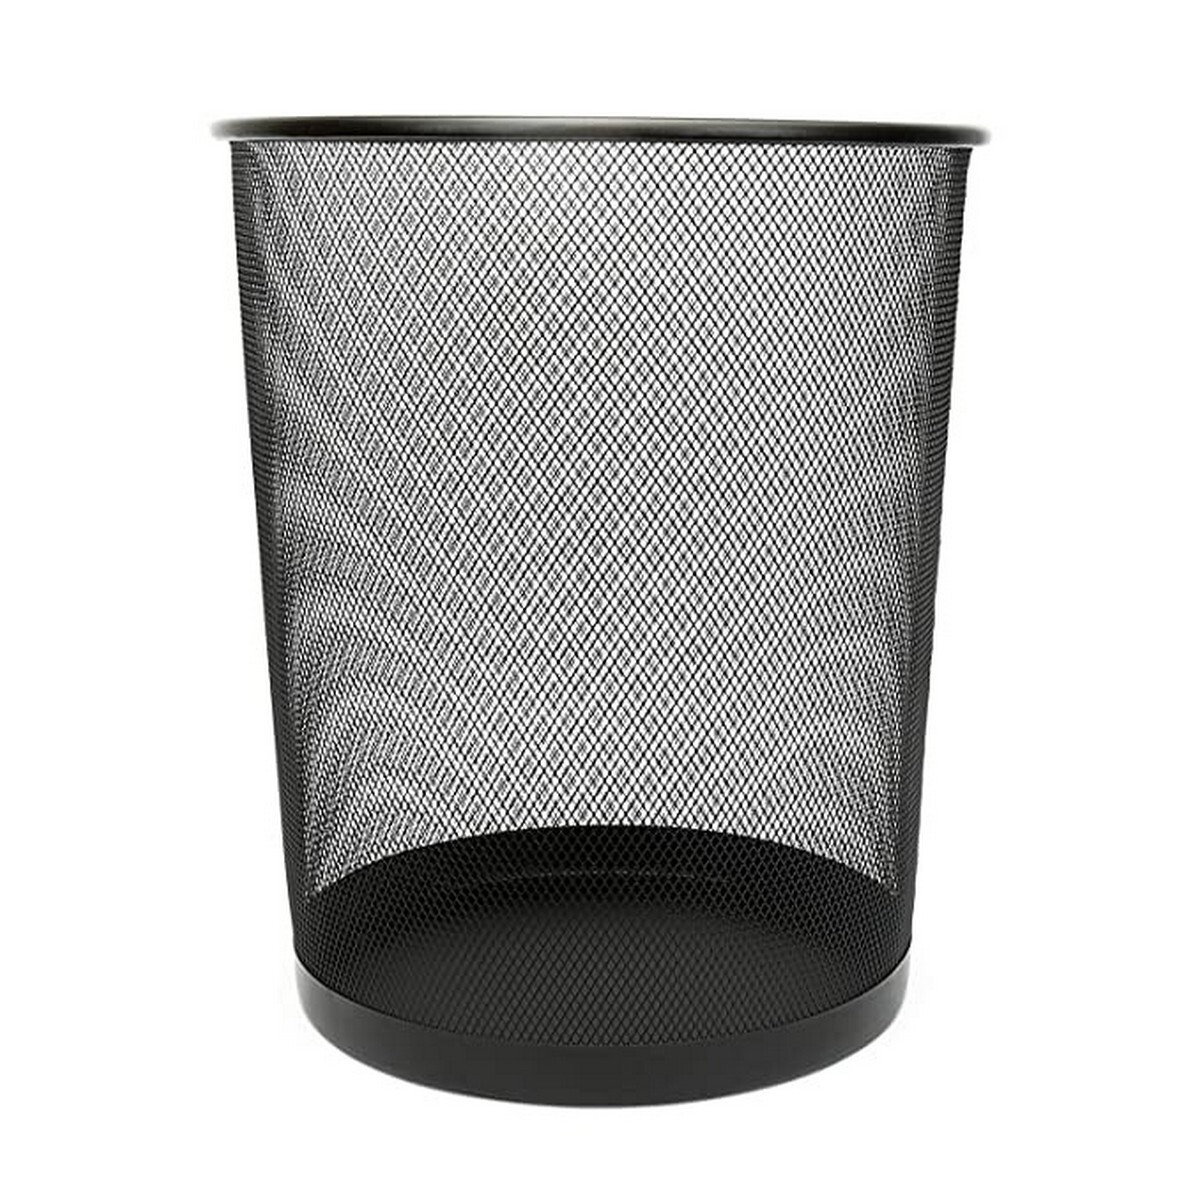 Home Well  Laundry Dust Bin LY9101